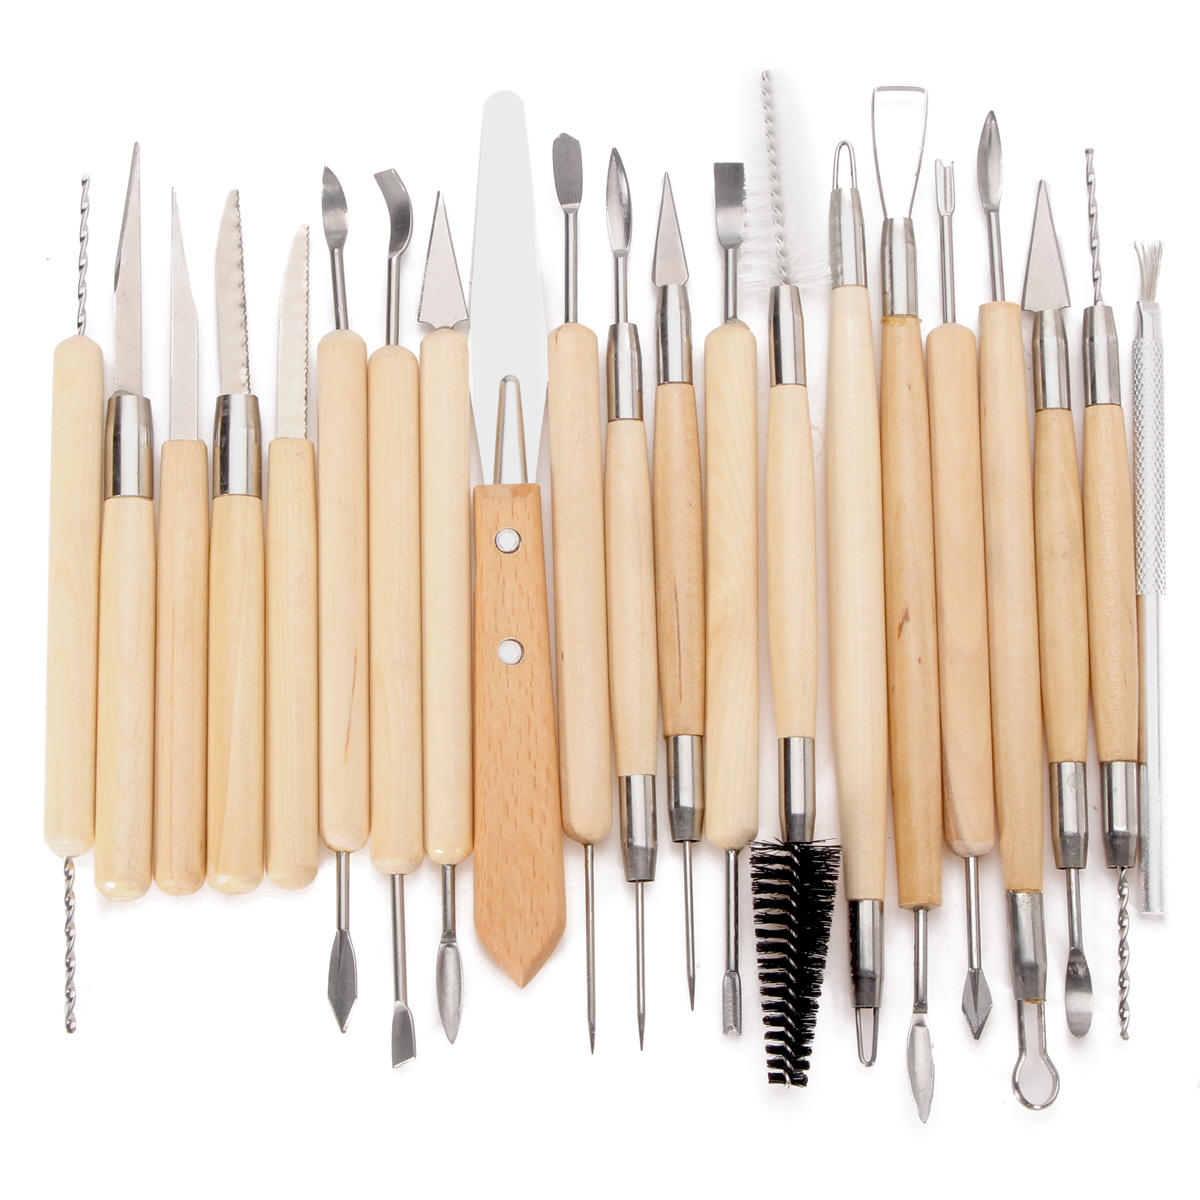 22pcs Clay Ceramics Carving Set Candle Pottery Tool Sculpting Making Modelling